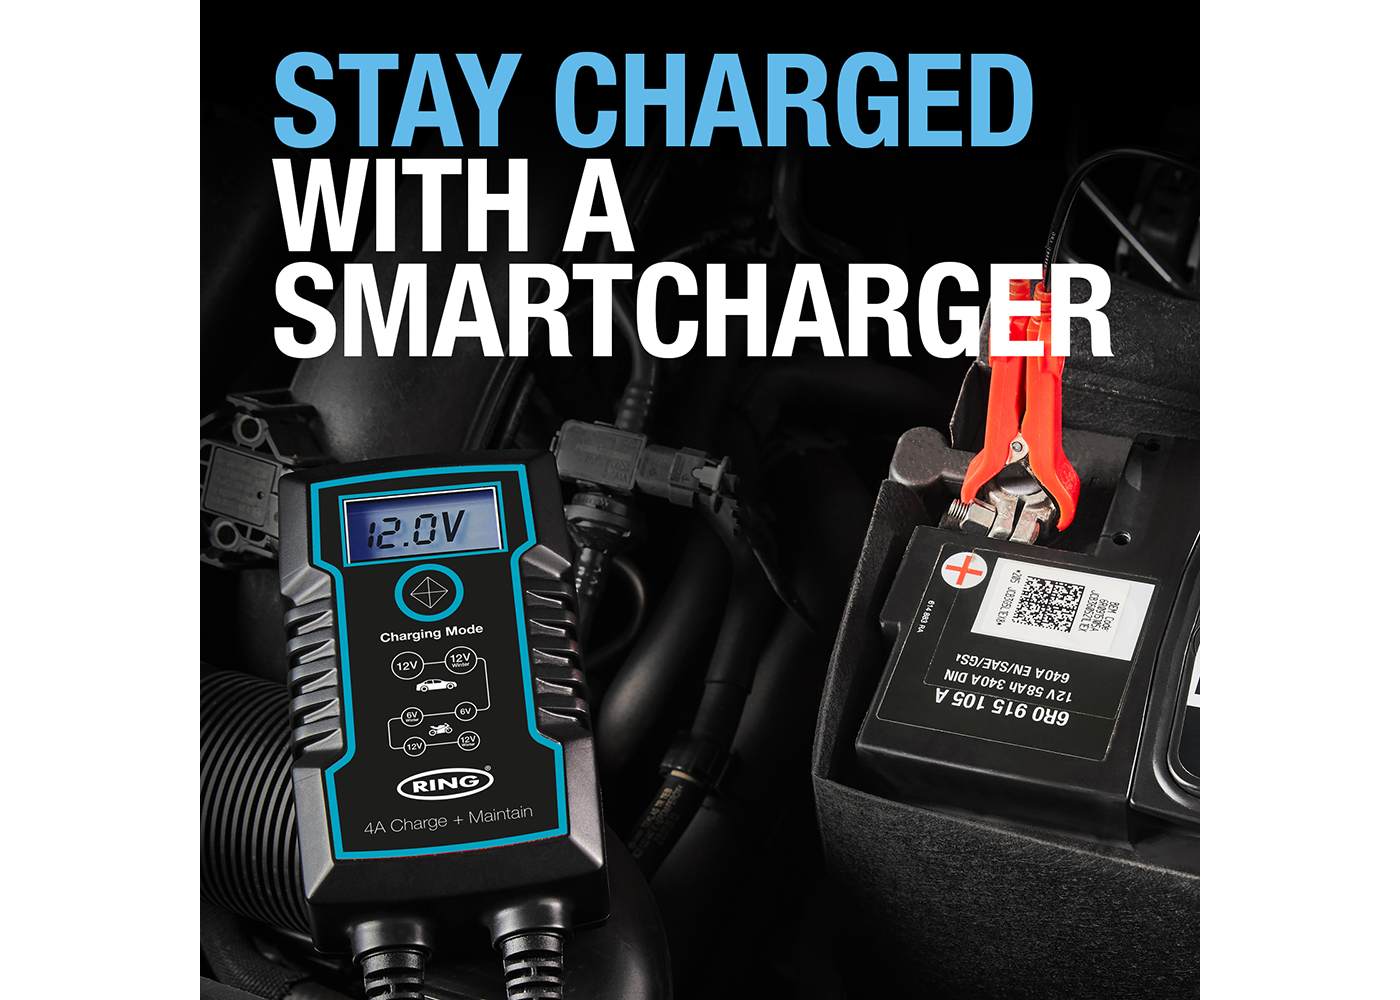 4A Smart Charger and Battery Maintainer, RSC804/RESC804